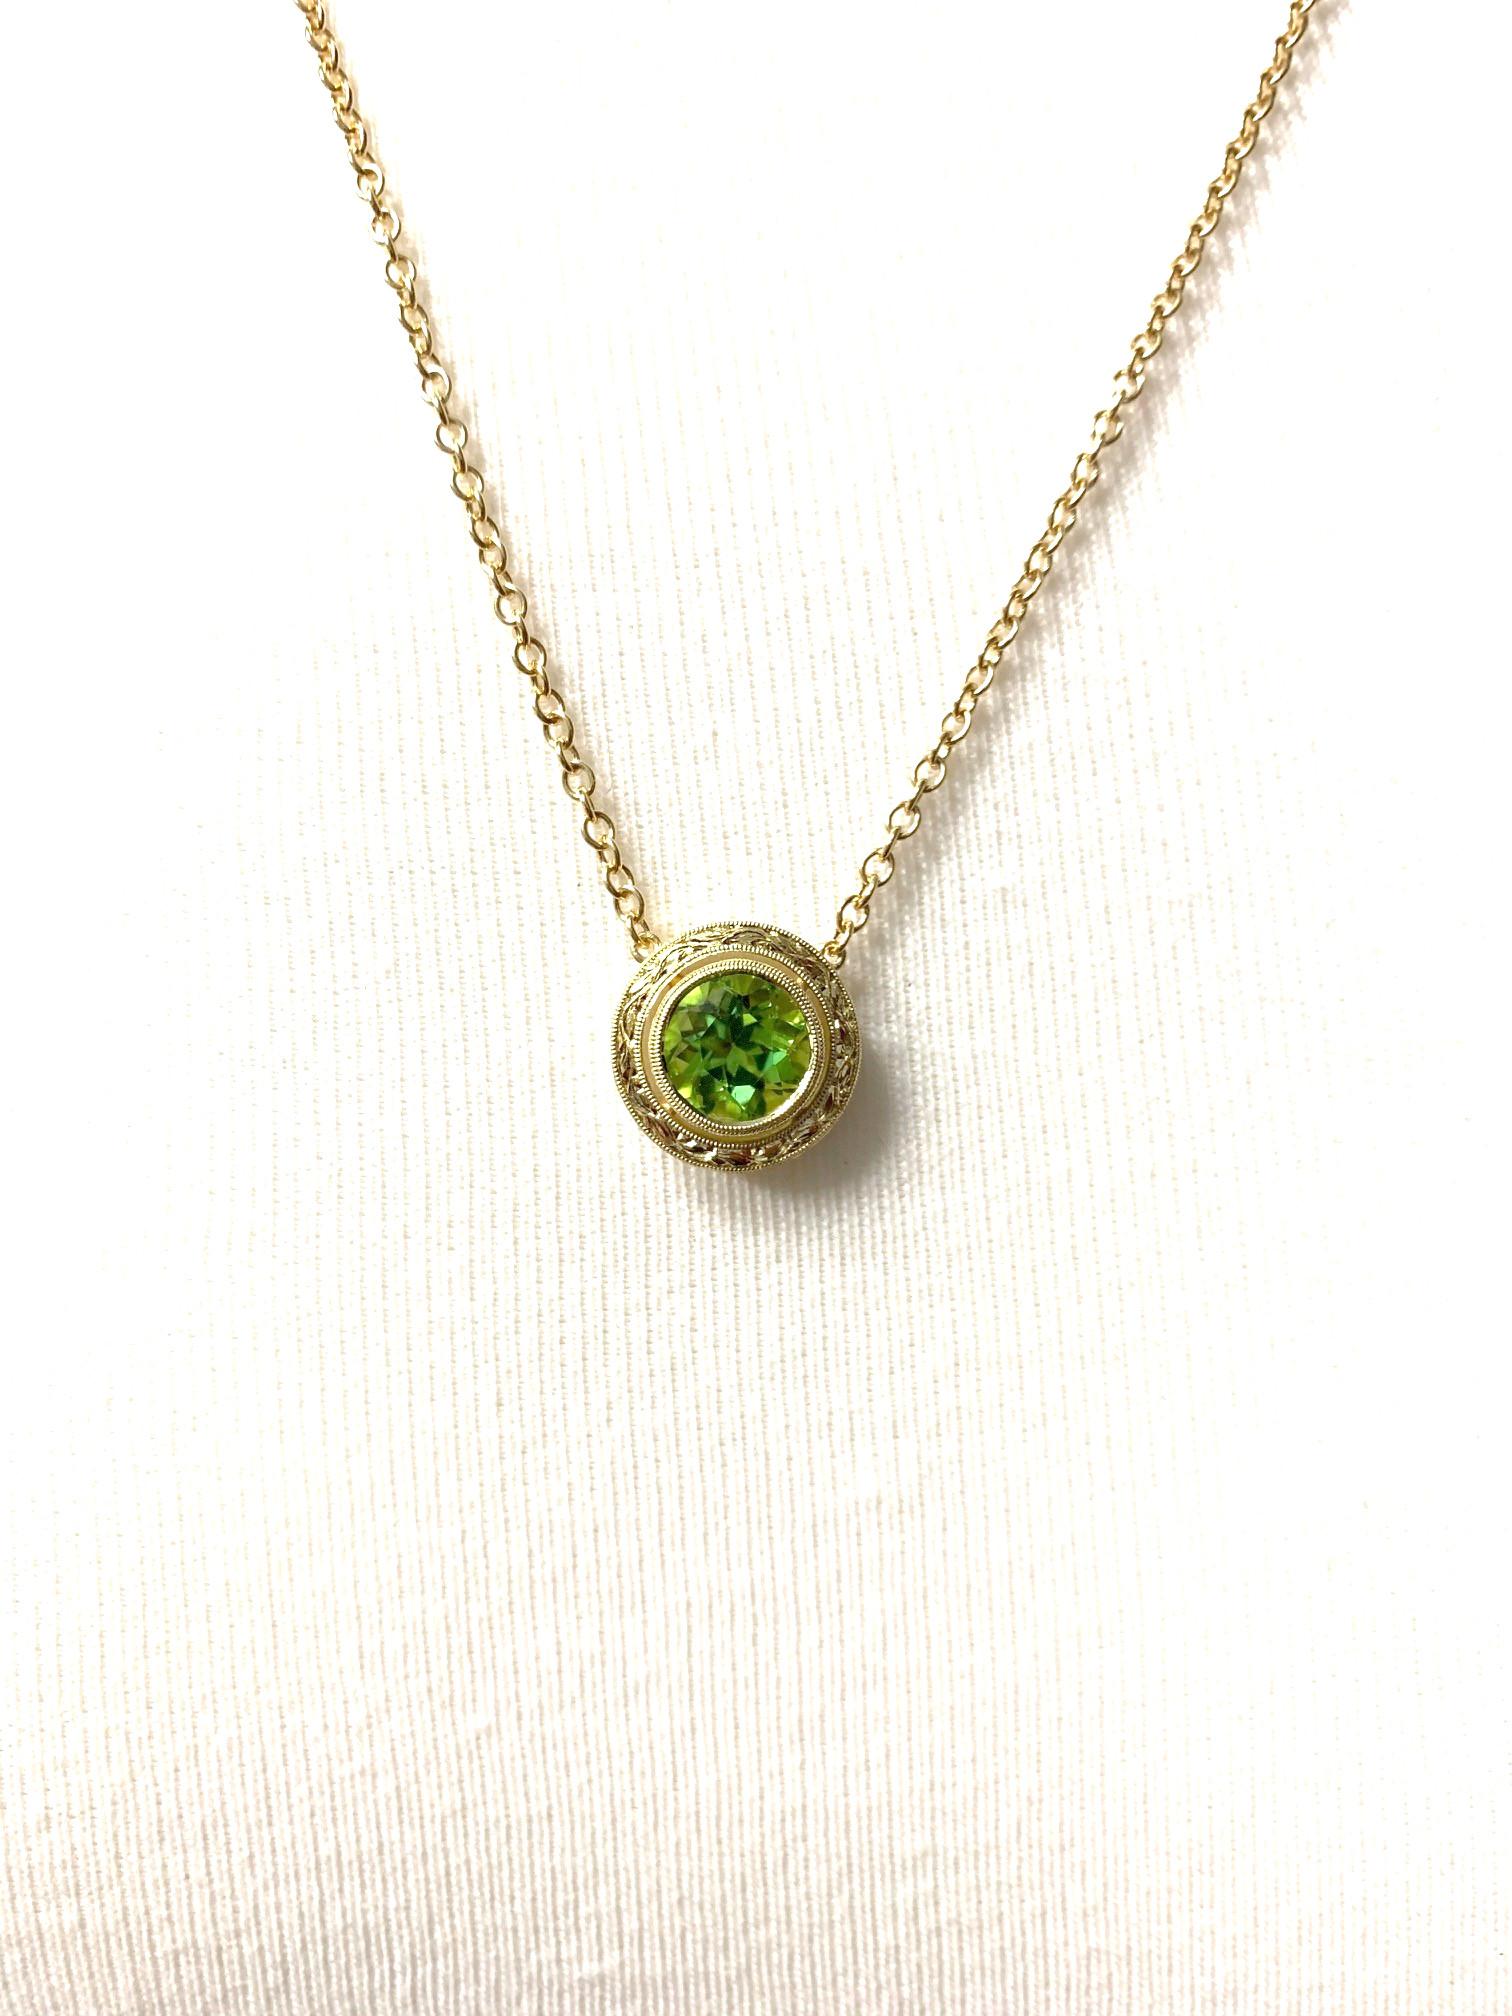 3.24 Carat Peridot Drop Necklace in Hand Engraved Yellow Gold  3